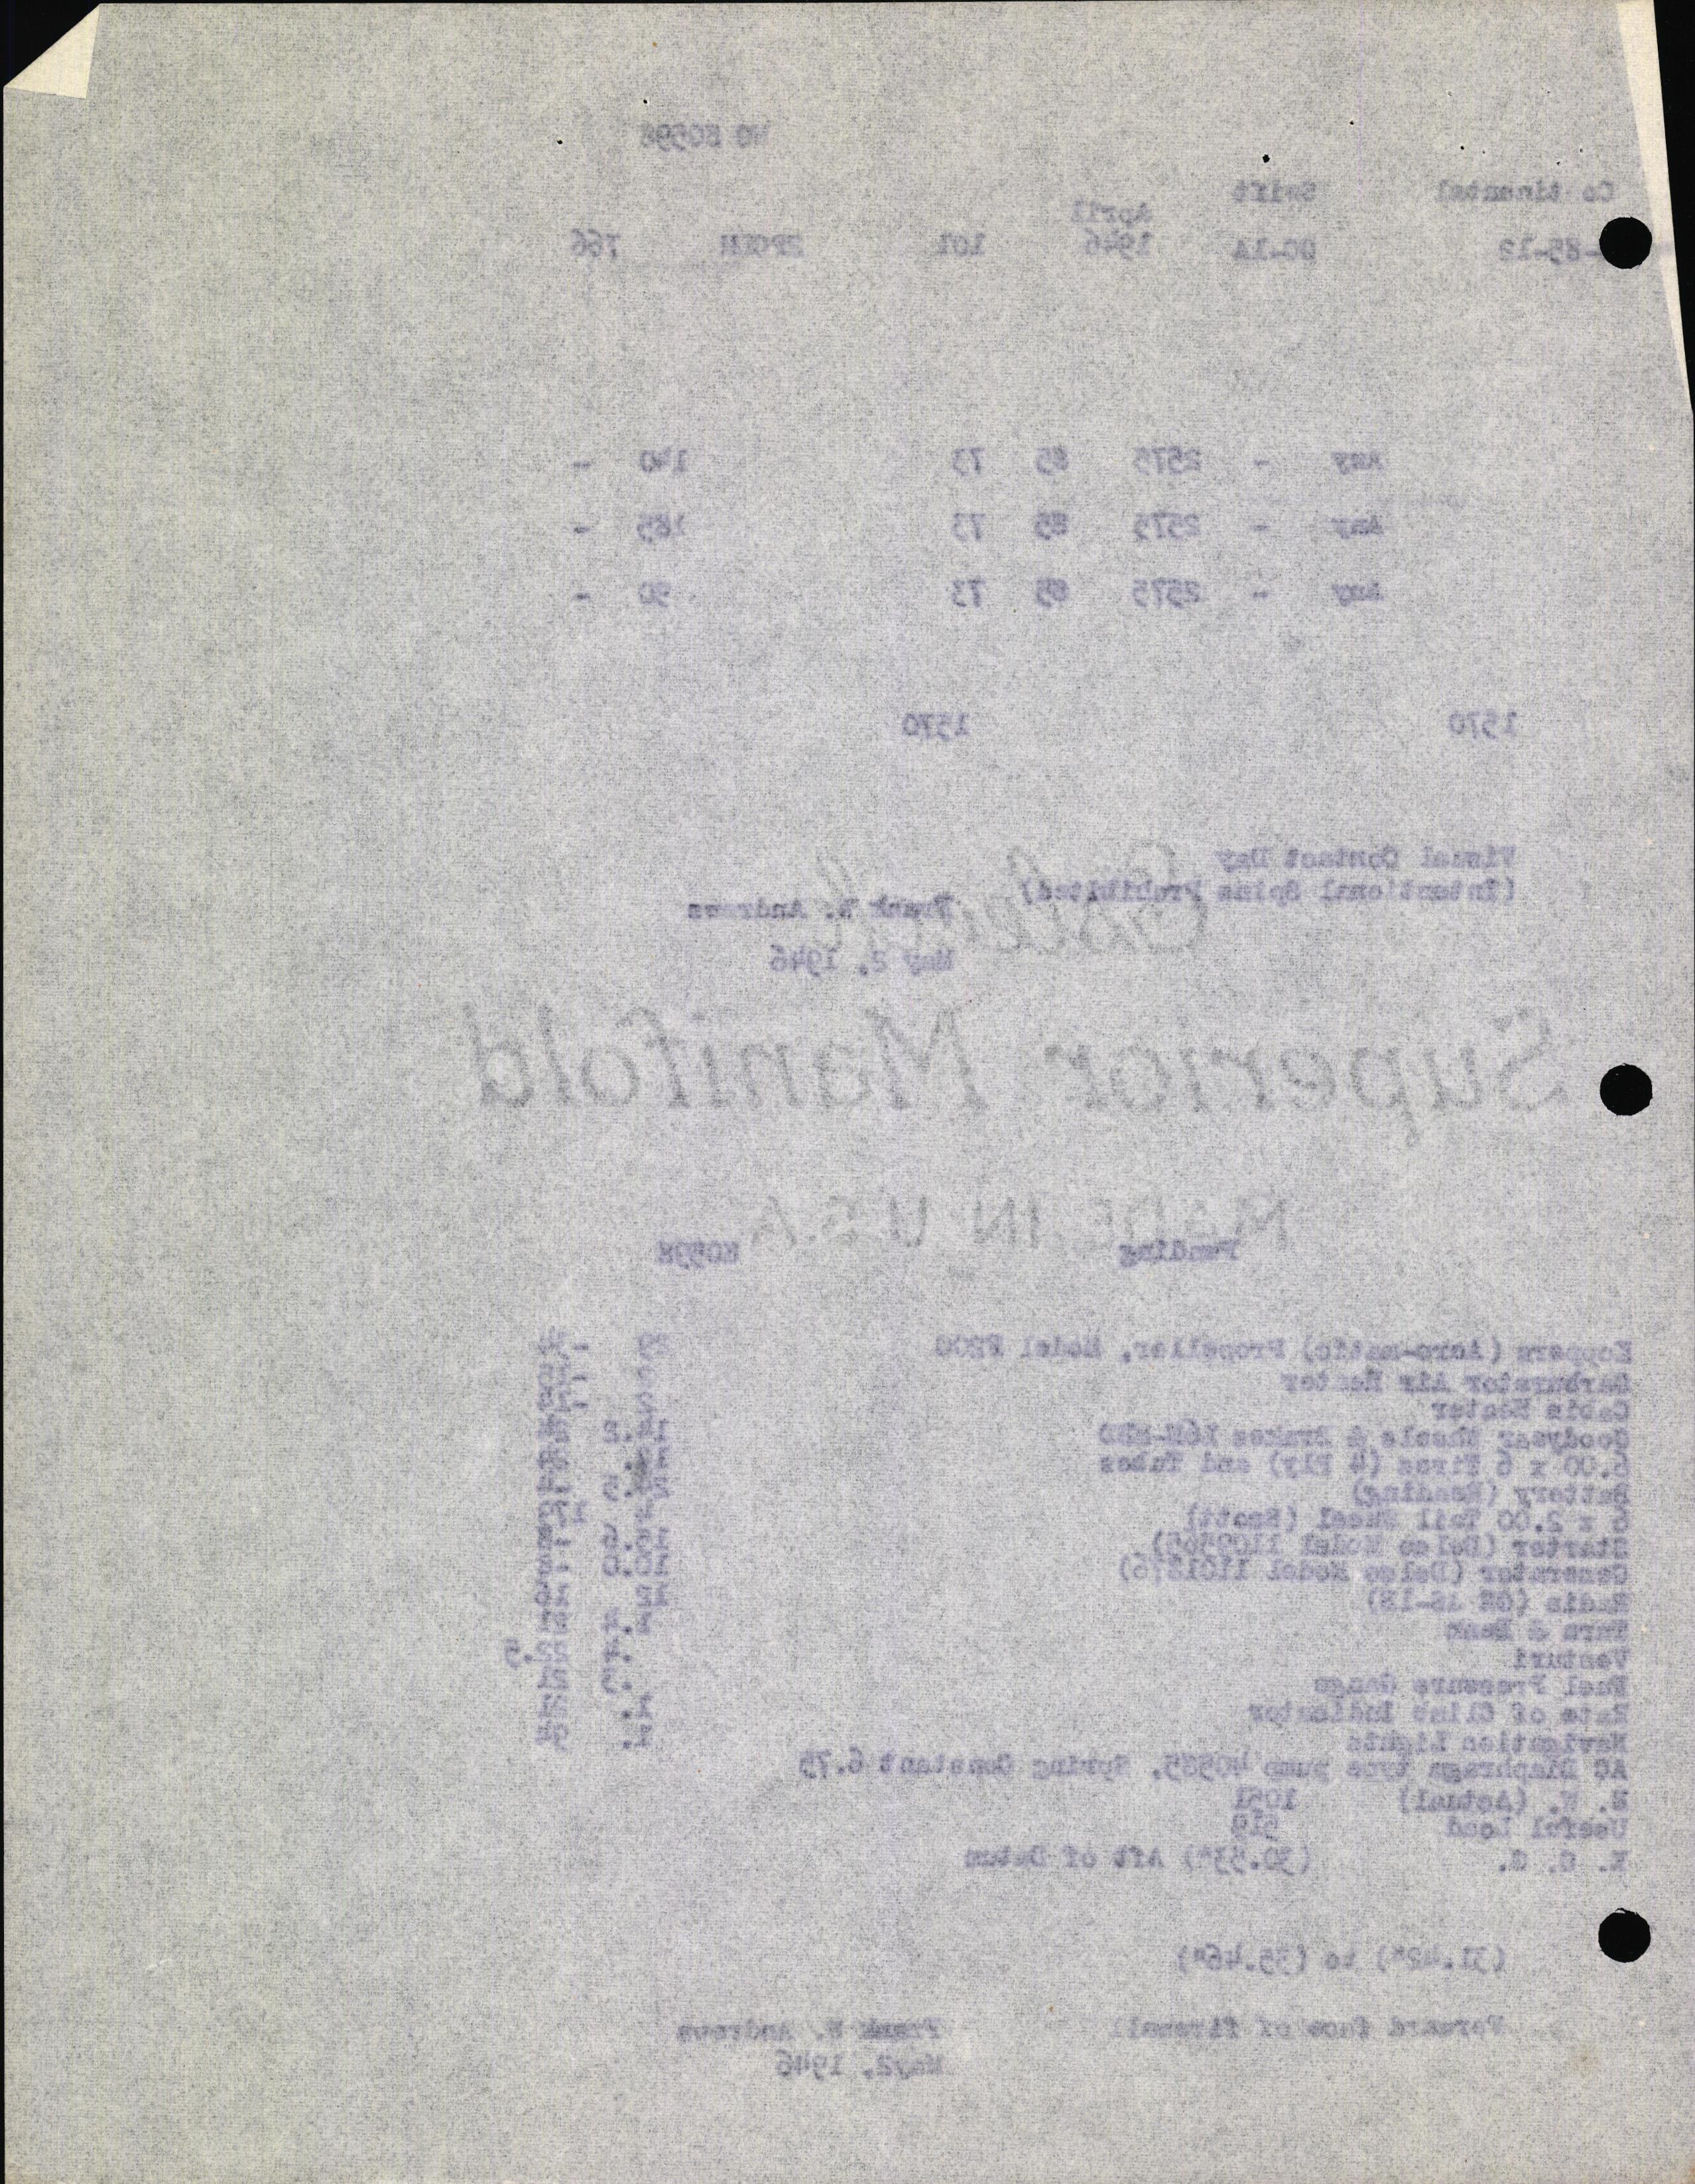 Sample page 10 from AirCorps Library document: Technical Information for Serial Number 101